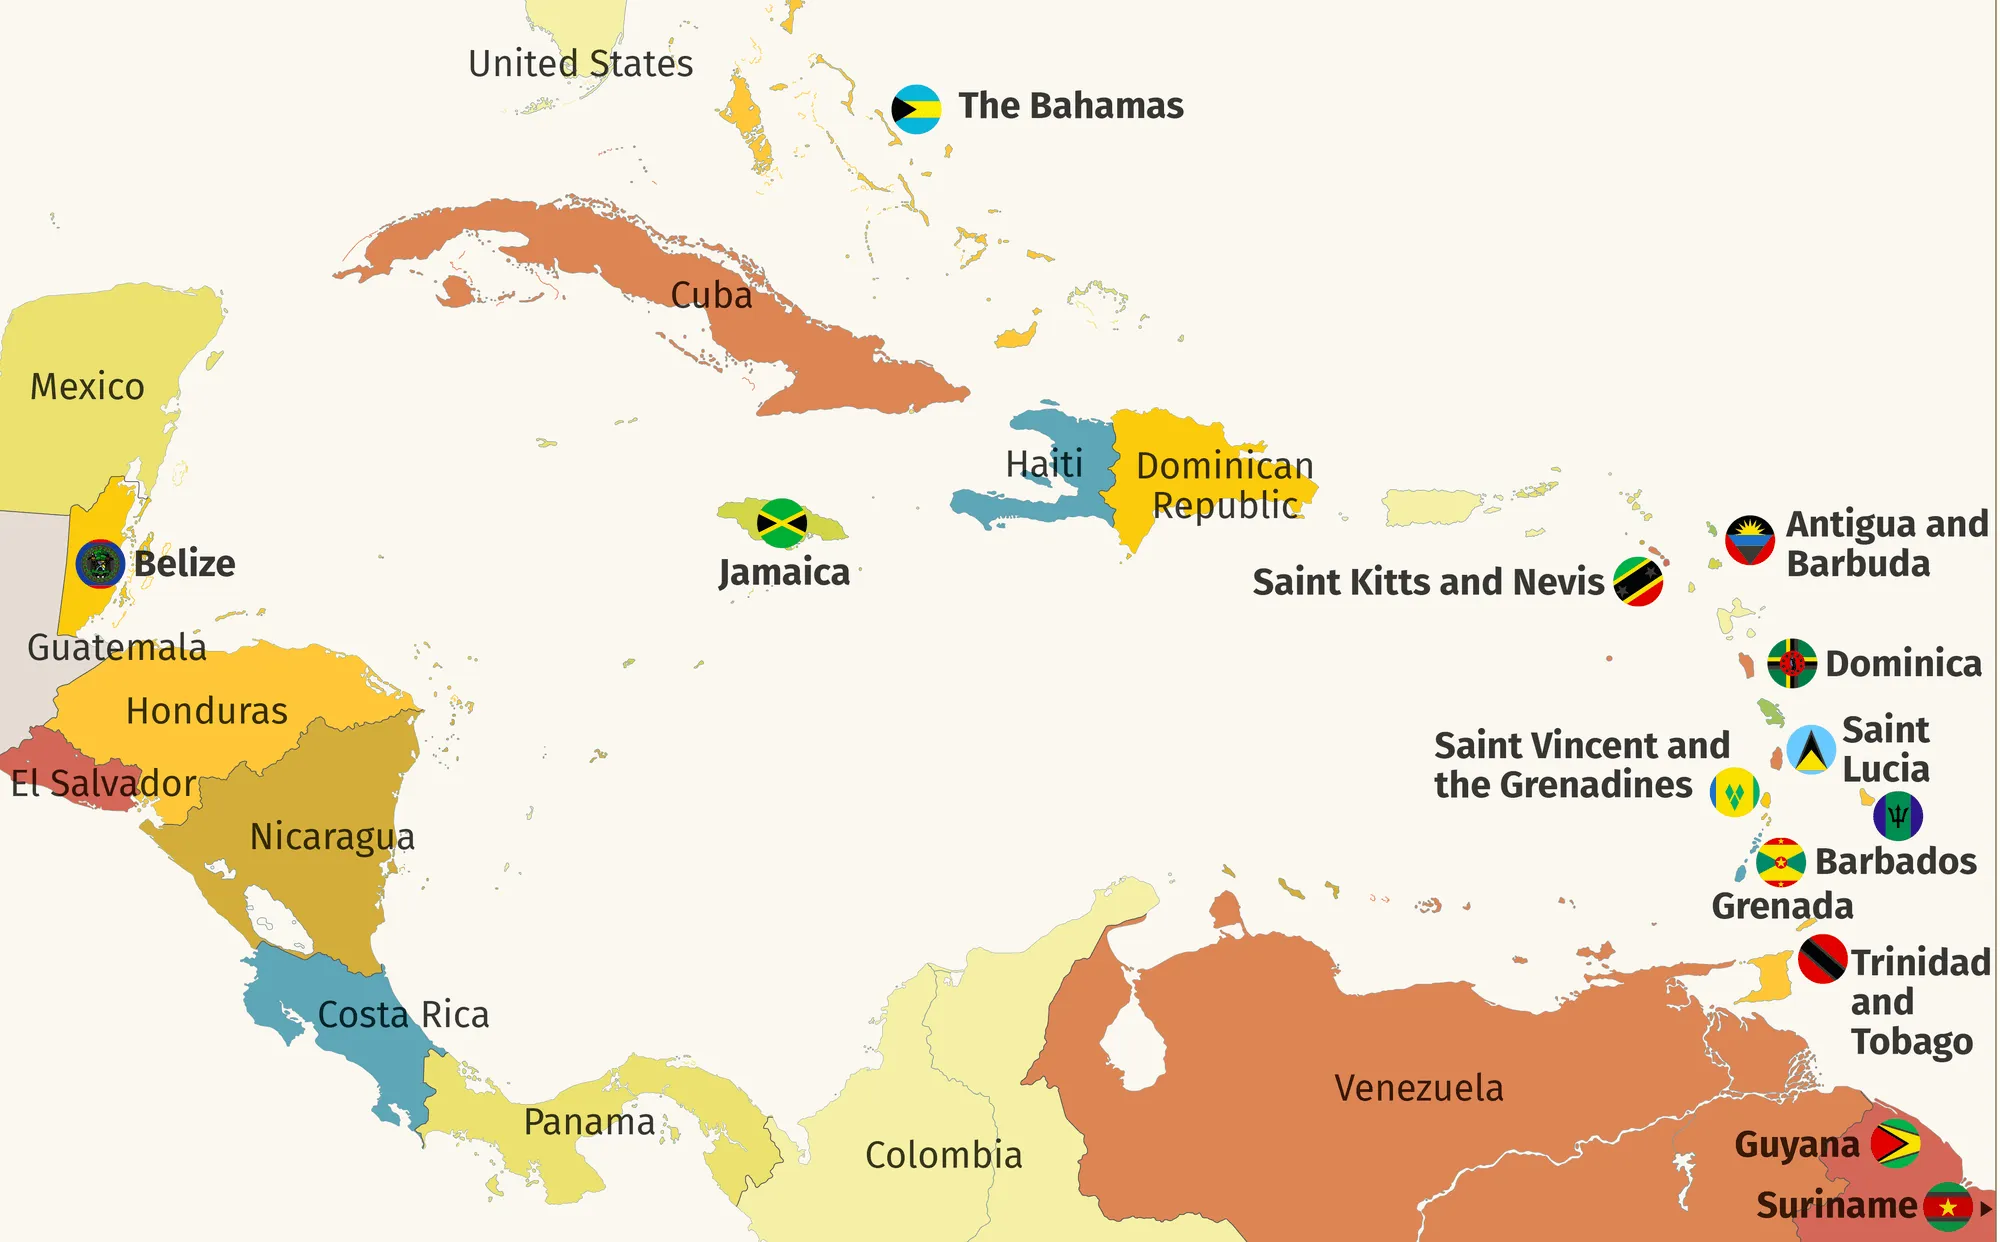 English-speaking countries in the Caribbean.